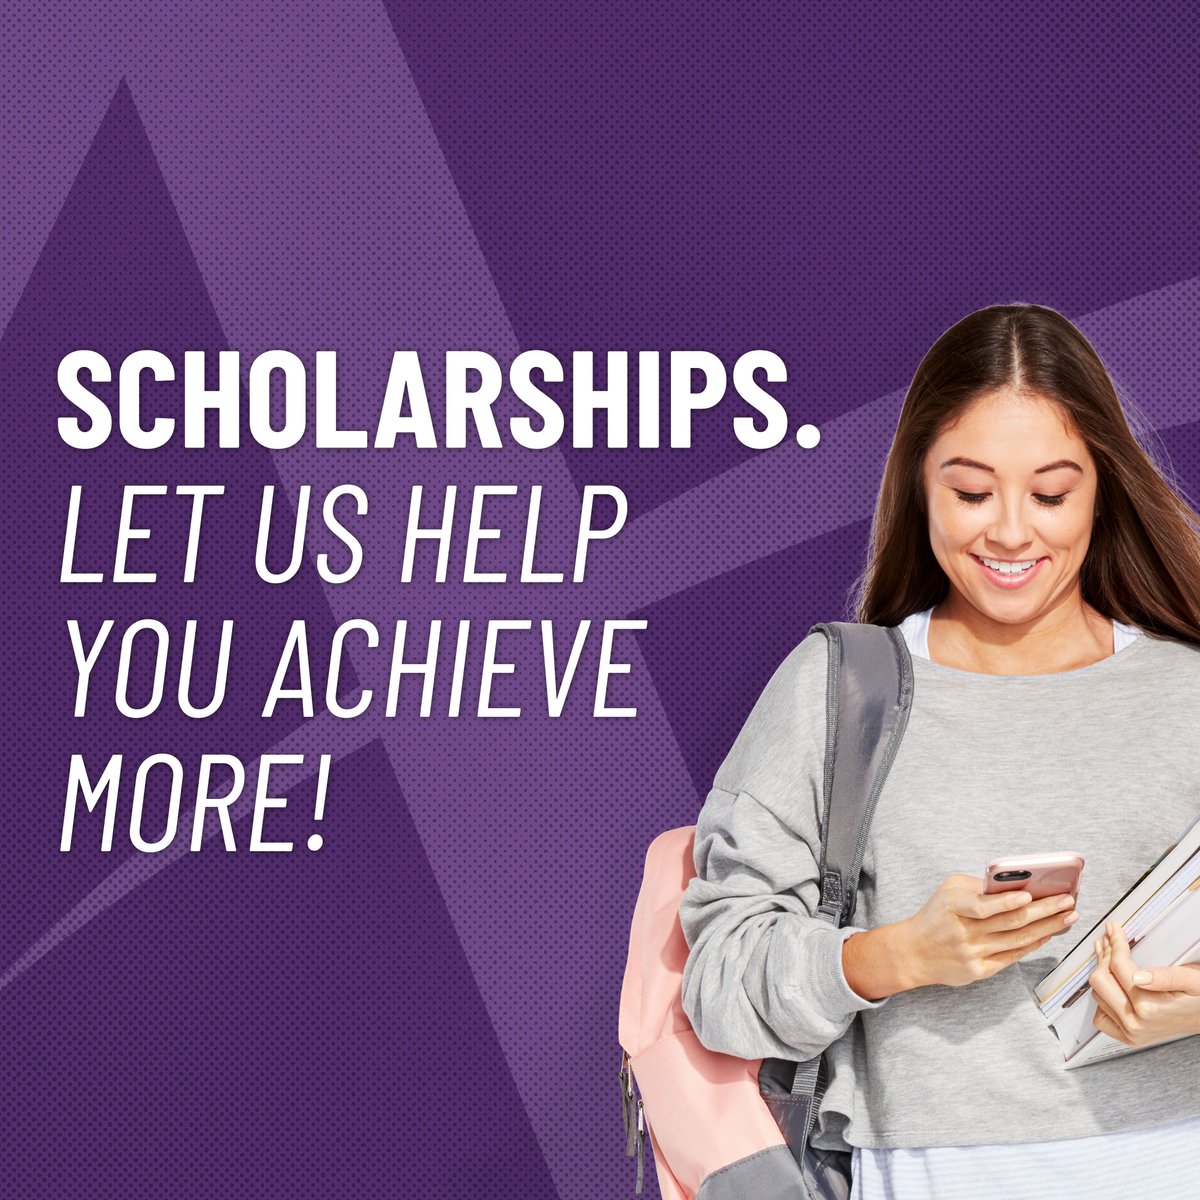 The Affinity Plus Foundation Scholarship Application is now open! Affinity Plus student members in good standing can apply now through May 31 for a $4,000 scholarship for the 2024-2025 academic year. Learn more and apply today at buff.ly/3xkDniY